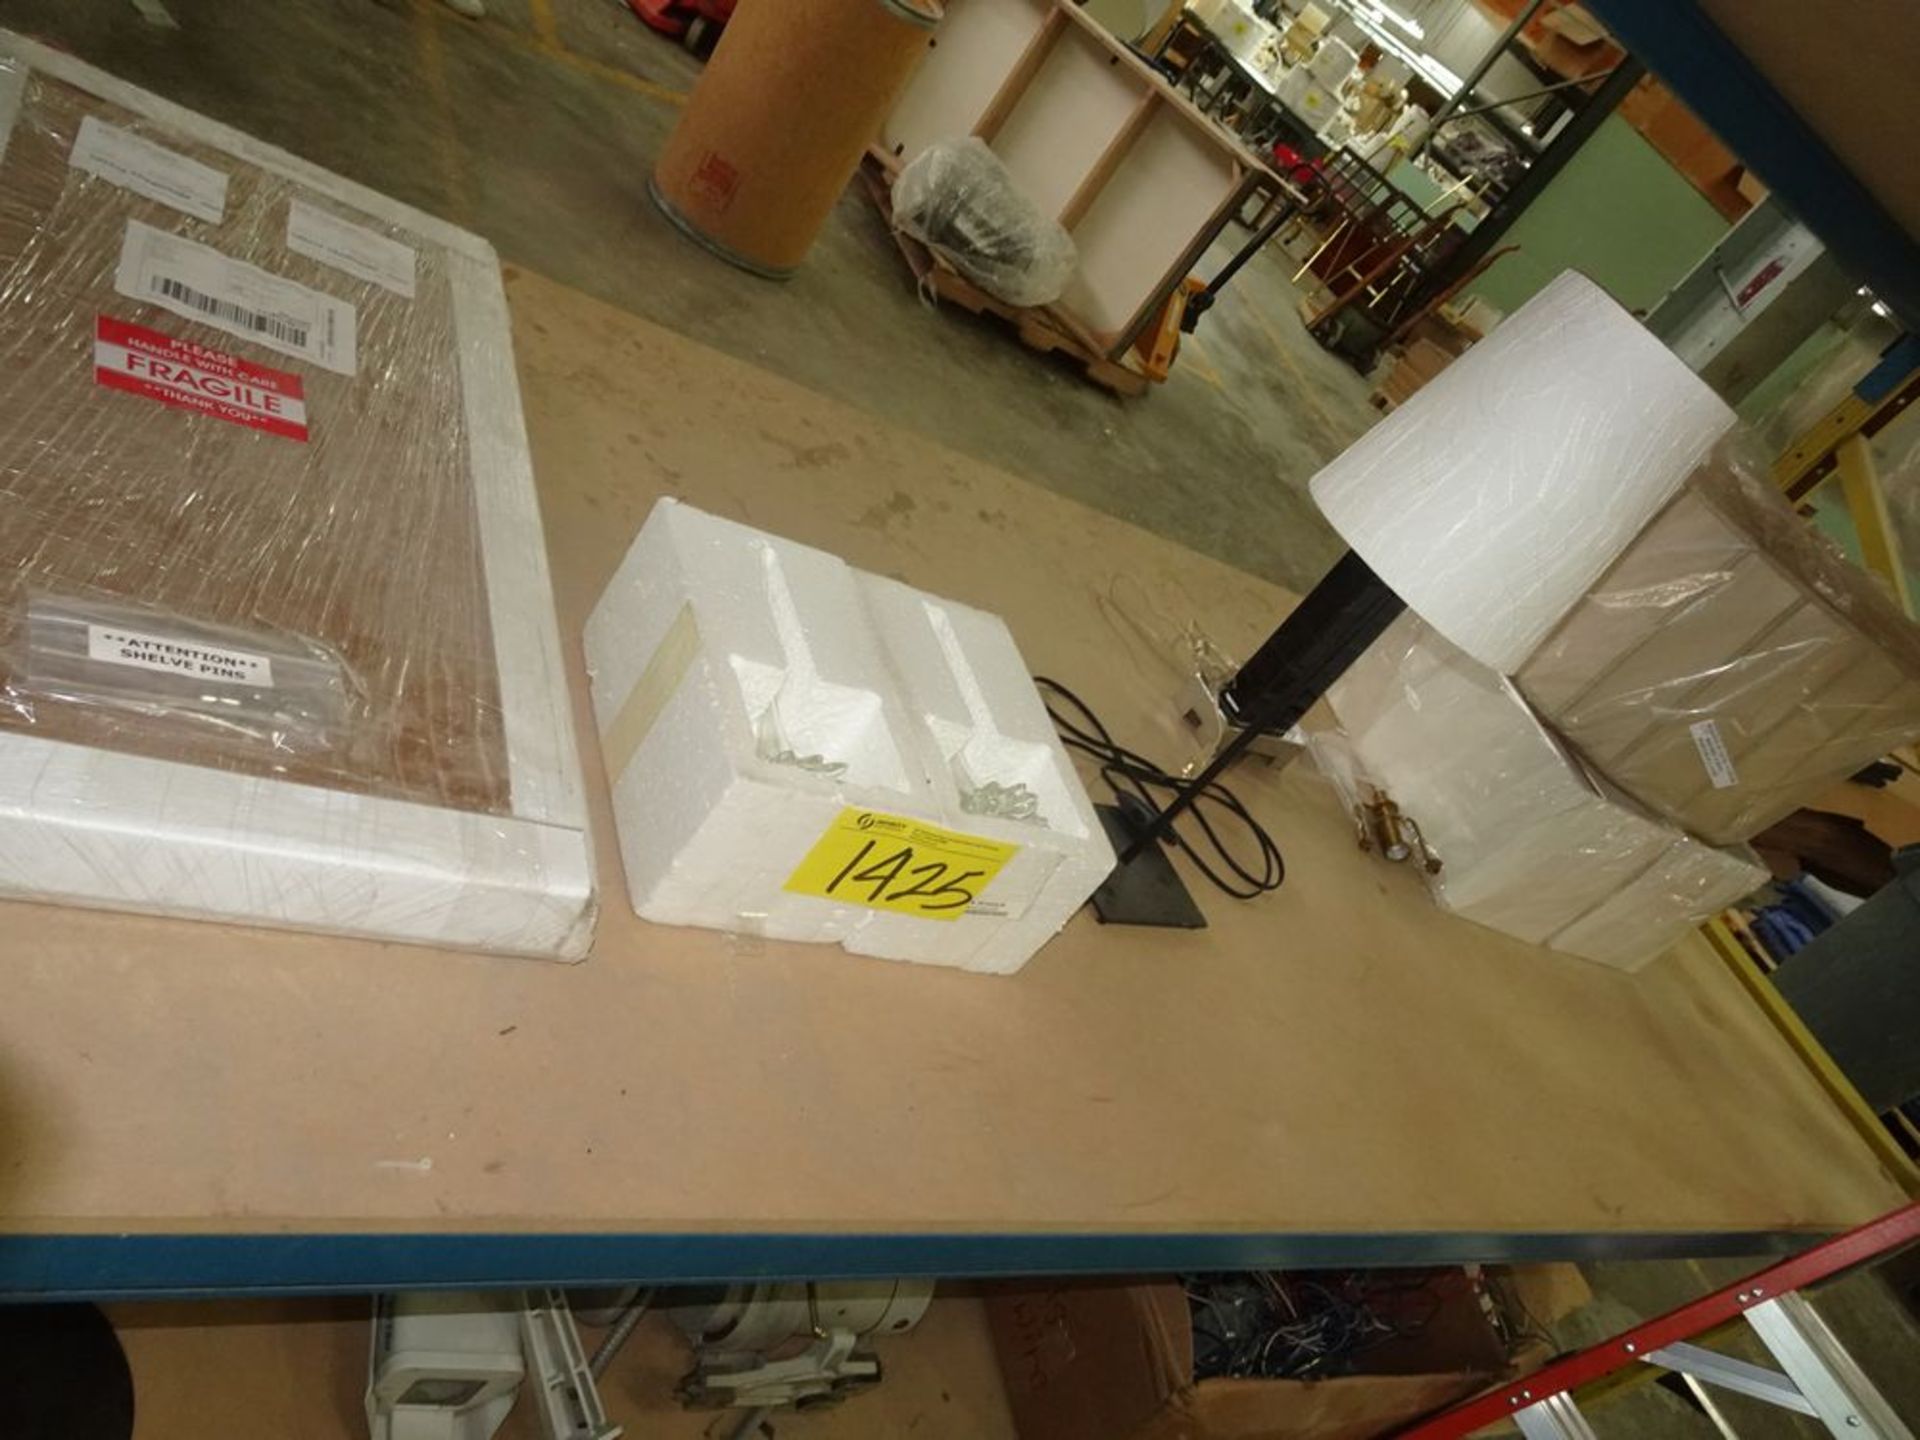 LOT-MISC. LAMP SHADES, BASES, CRYSTAL PIECES, KNIVES, SHELVES, ETC.